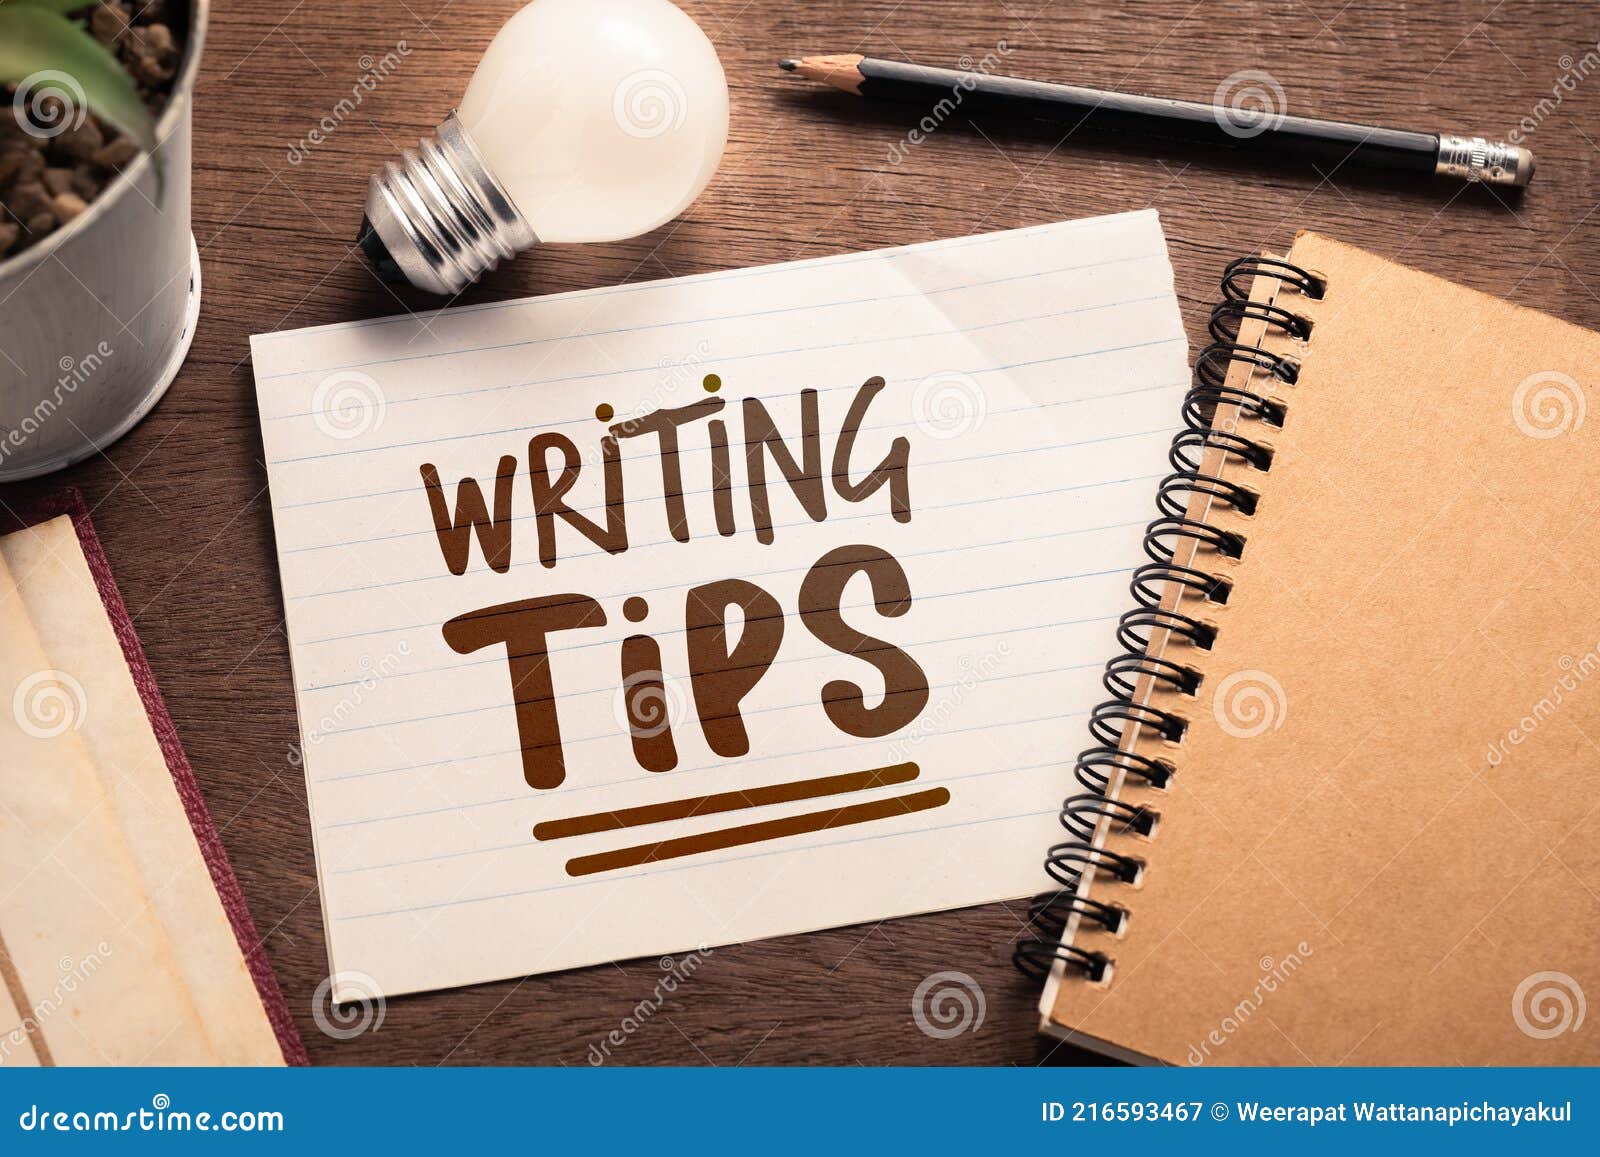 writing tips note on the desk